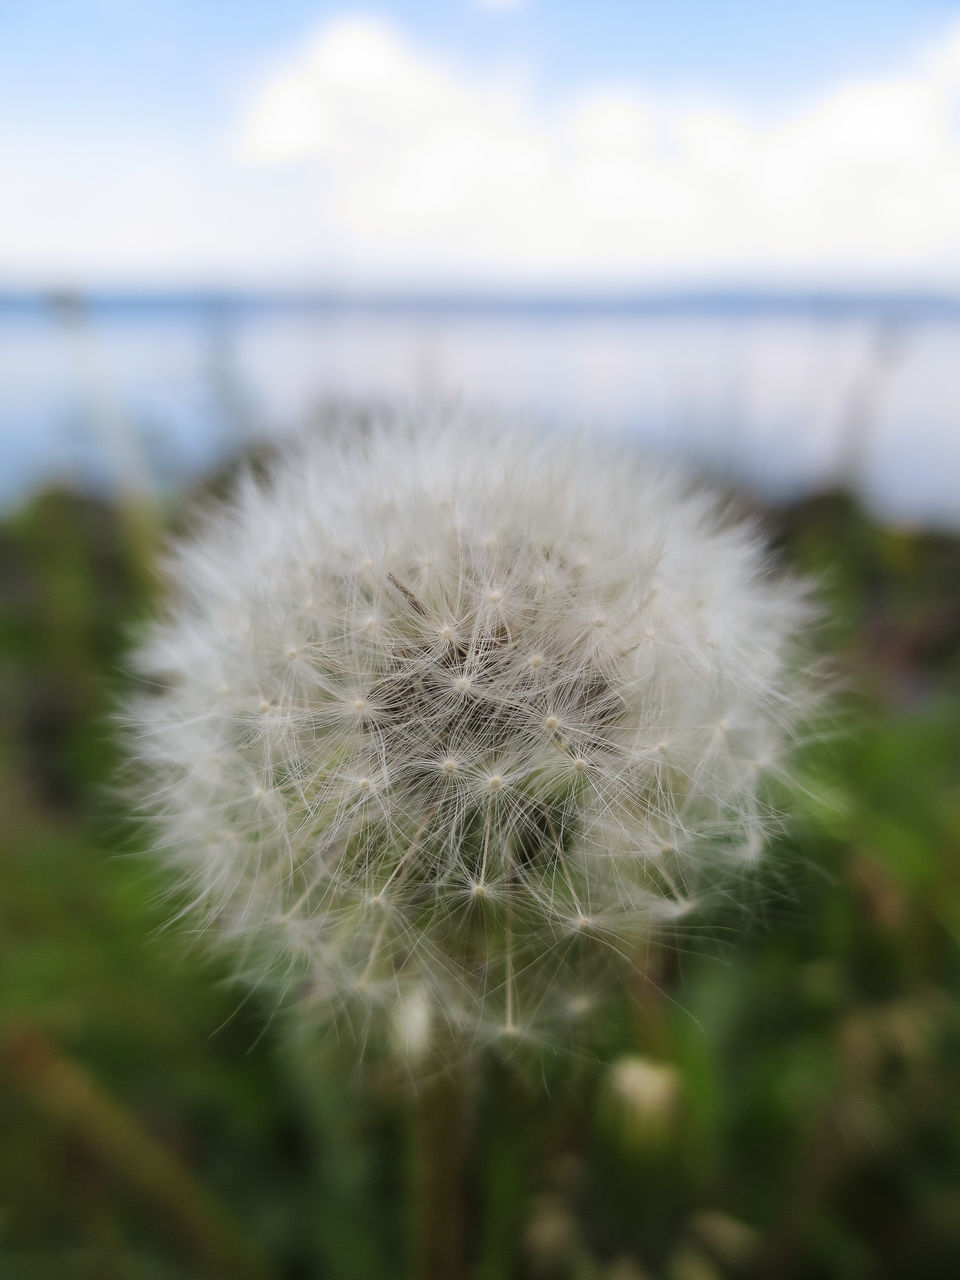 flower, dandelion, fragility, flower head, freshness, close-up, focus on foreground, growth, beauty in nature, single flower, nature, softness, wildflower, stem, white color, plant, sky, uncultivated, day, outdoors